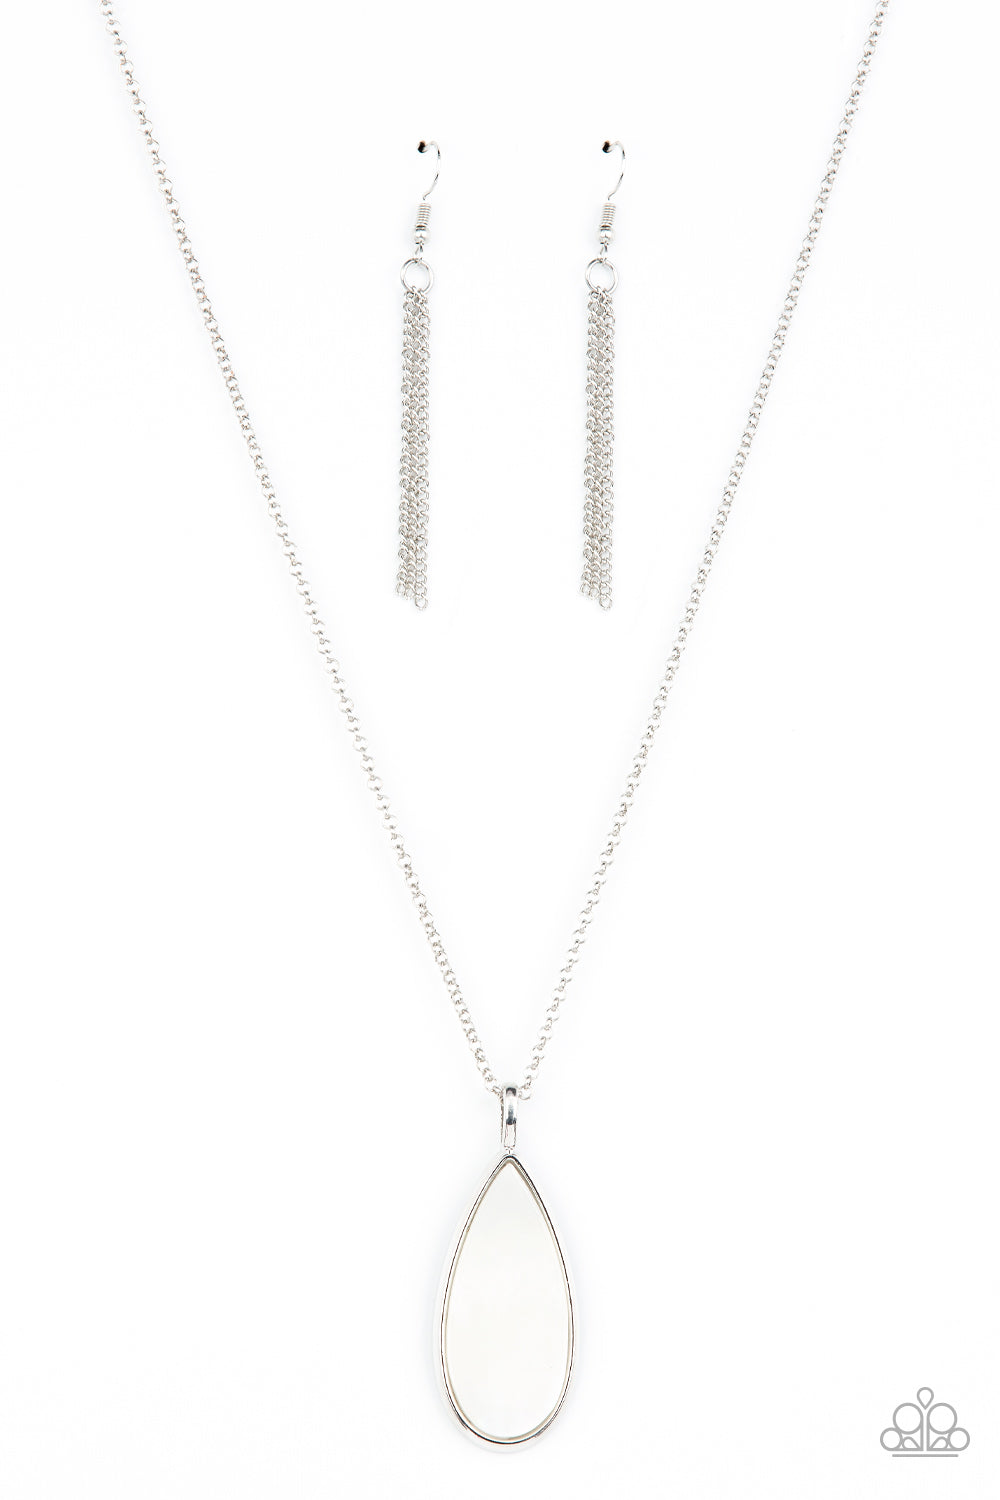 Yacht Ready Paparazzi Accessories Necklace with Earrings White